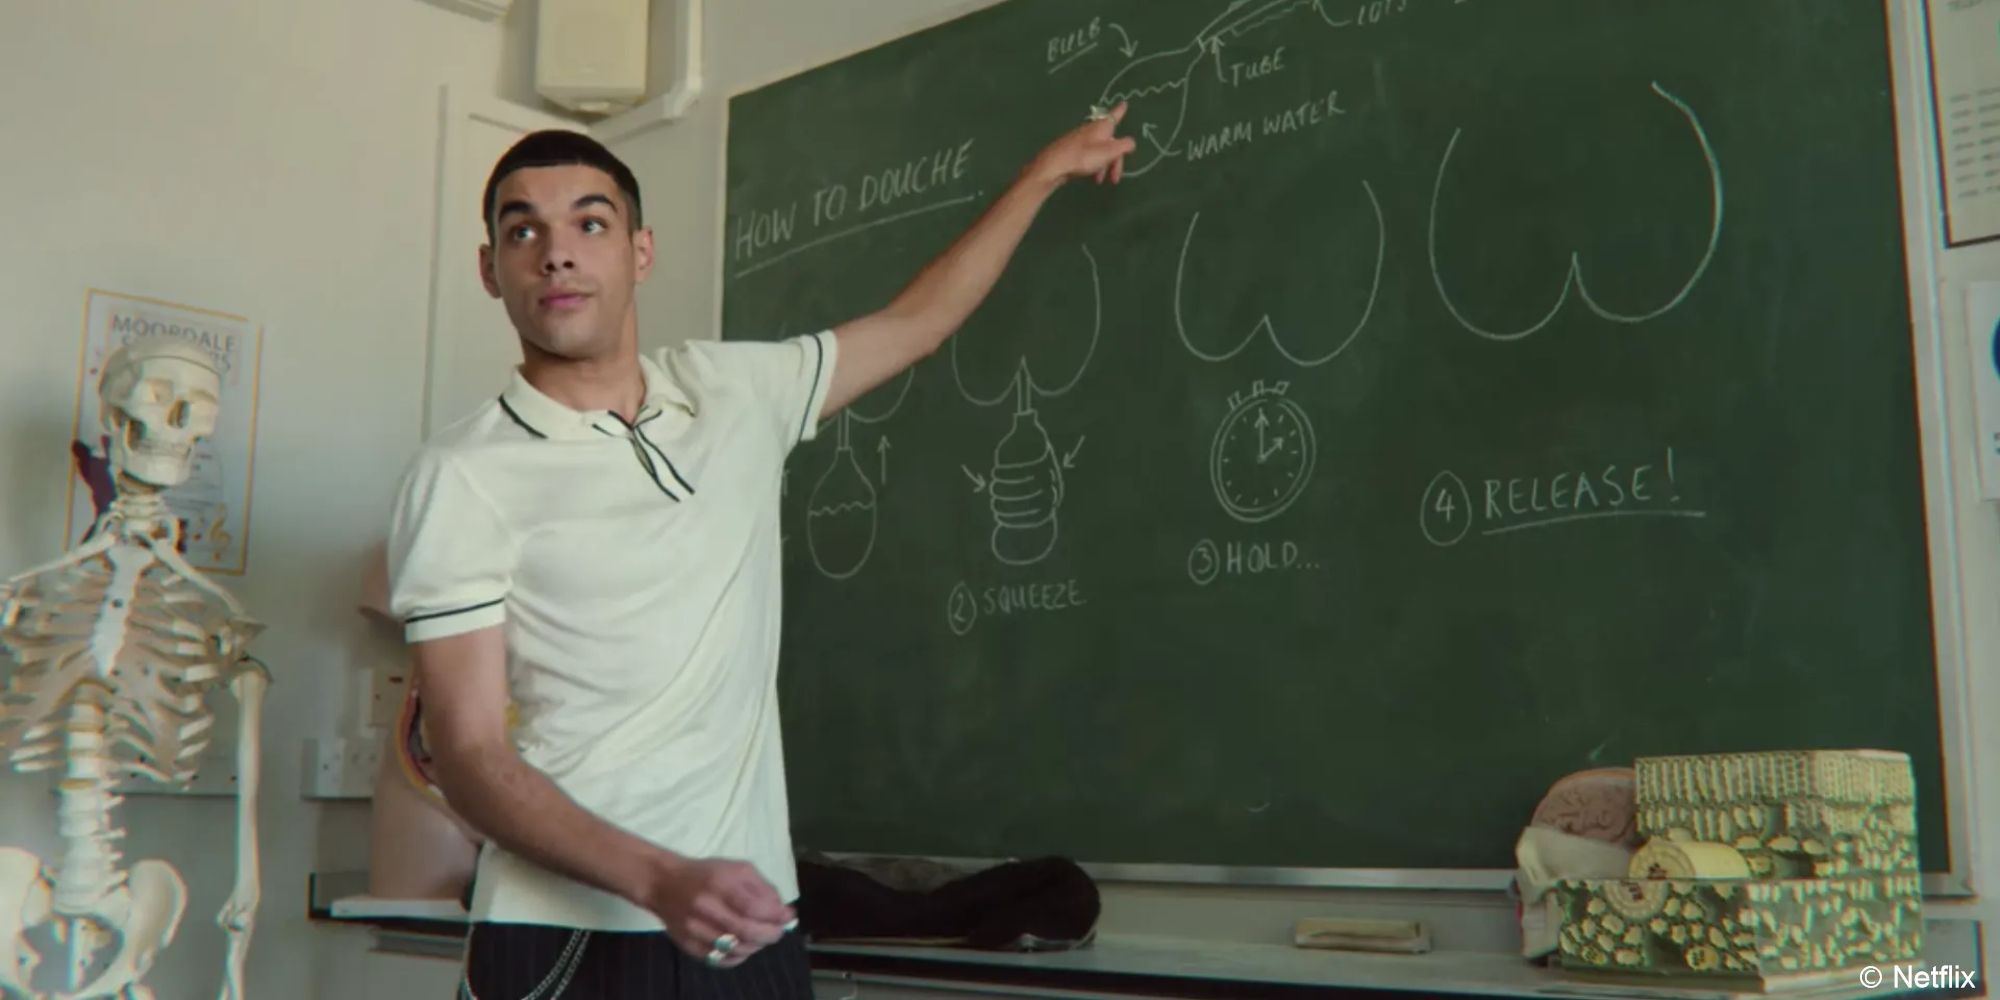 Sex Education_Rahim teaches students from a chalkboard